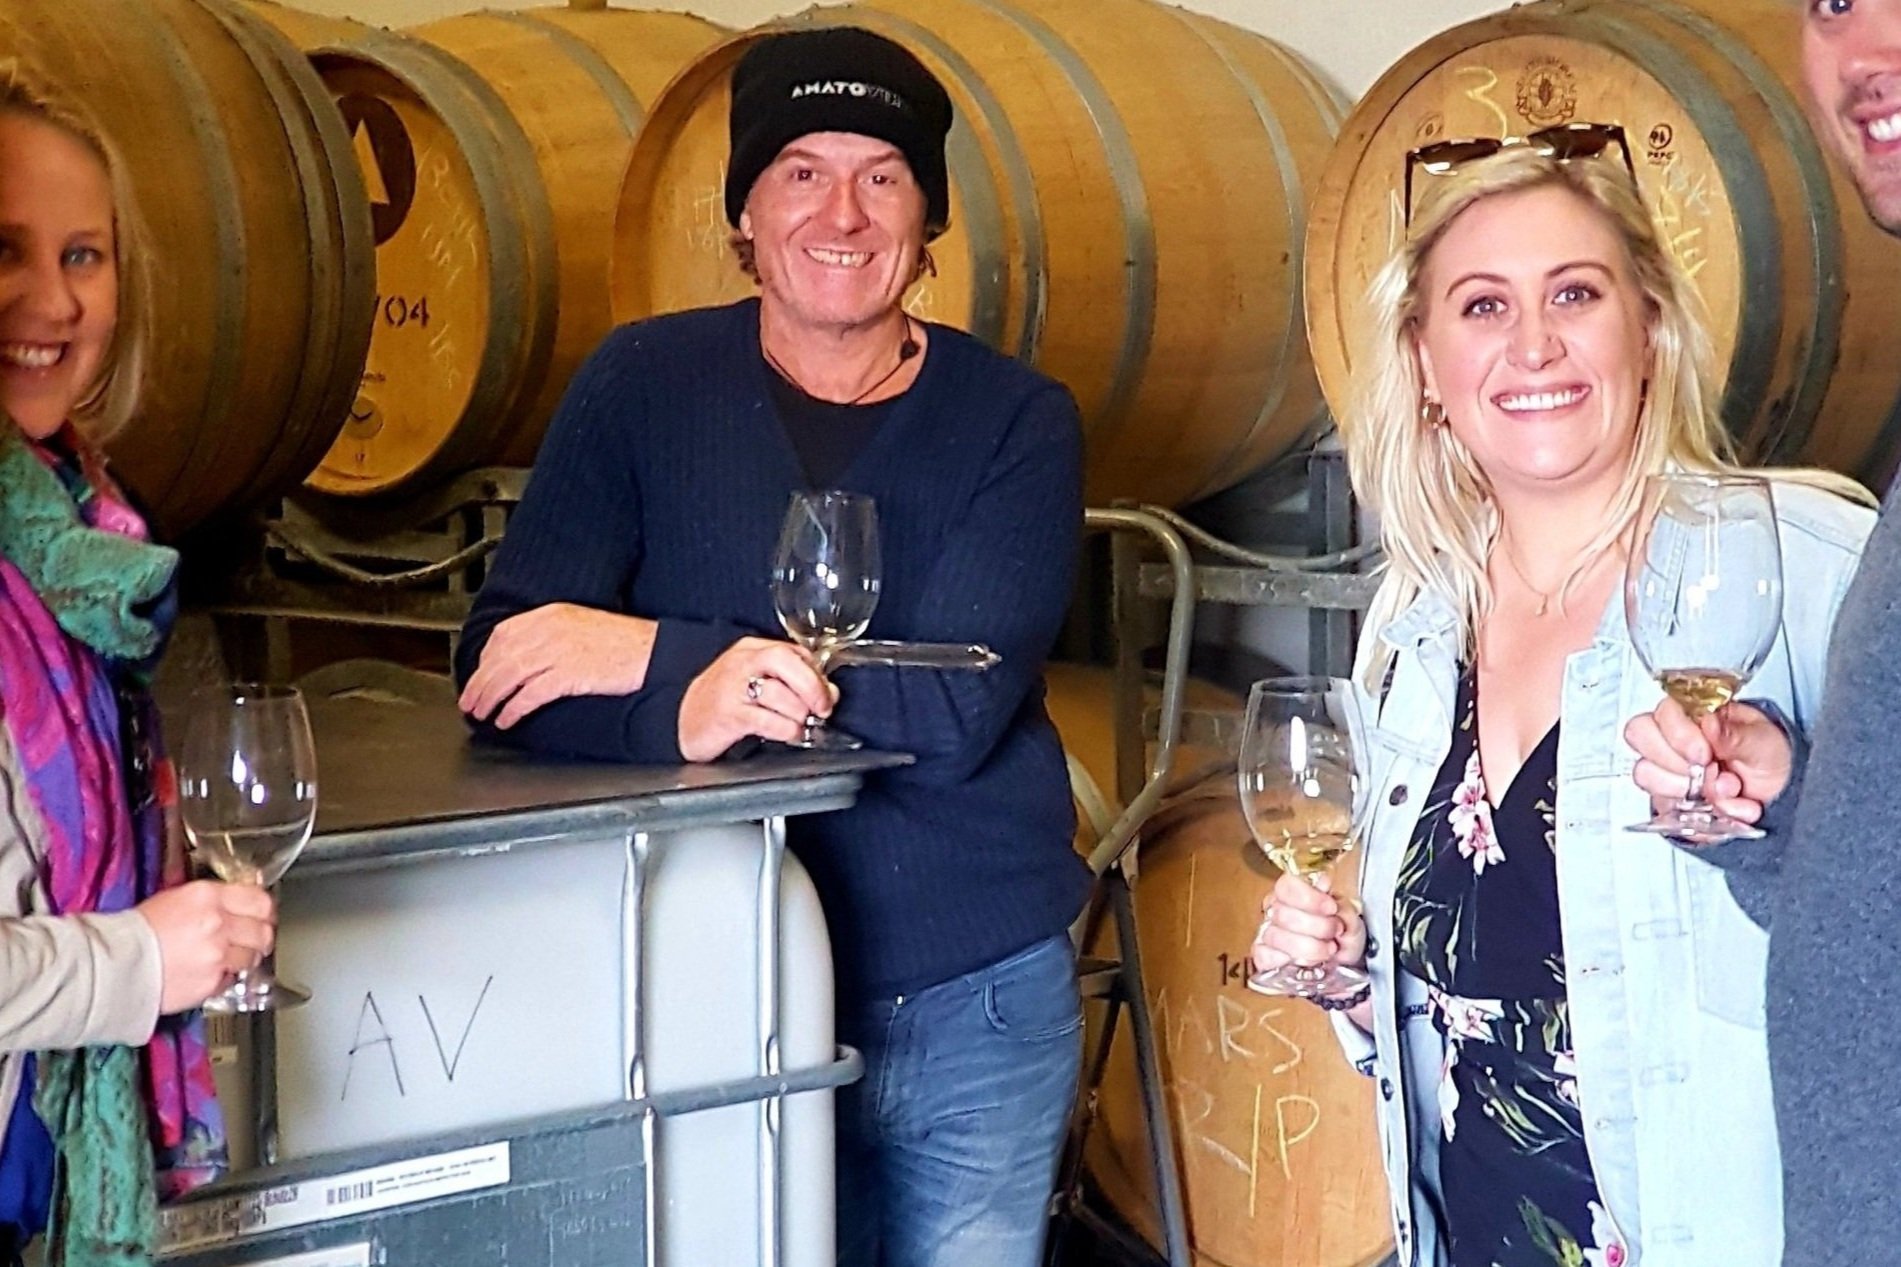 A visit to the 'Wines by Brad' creator and now AMATO VINO